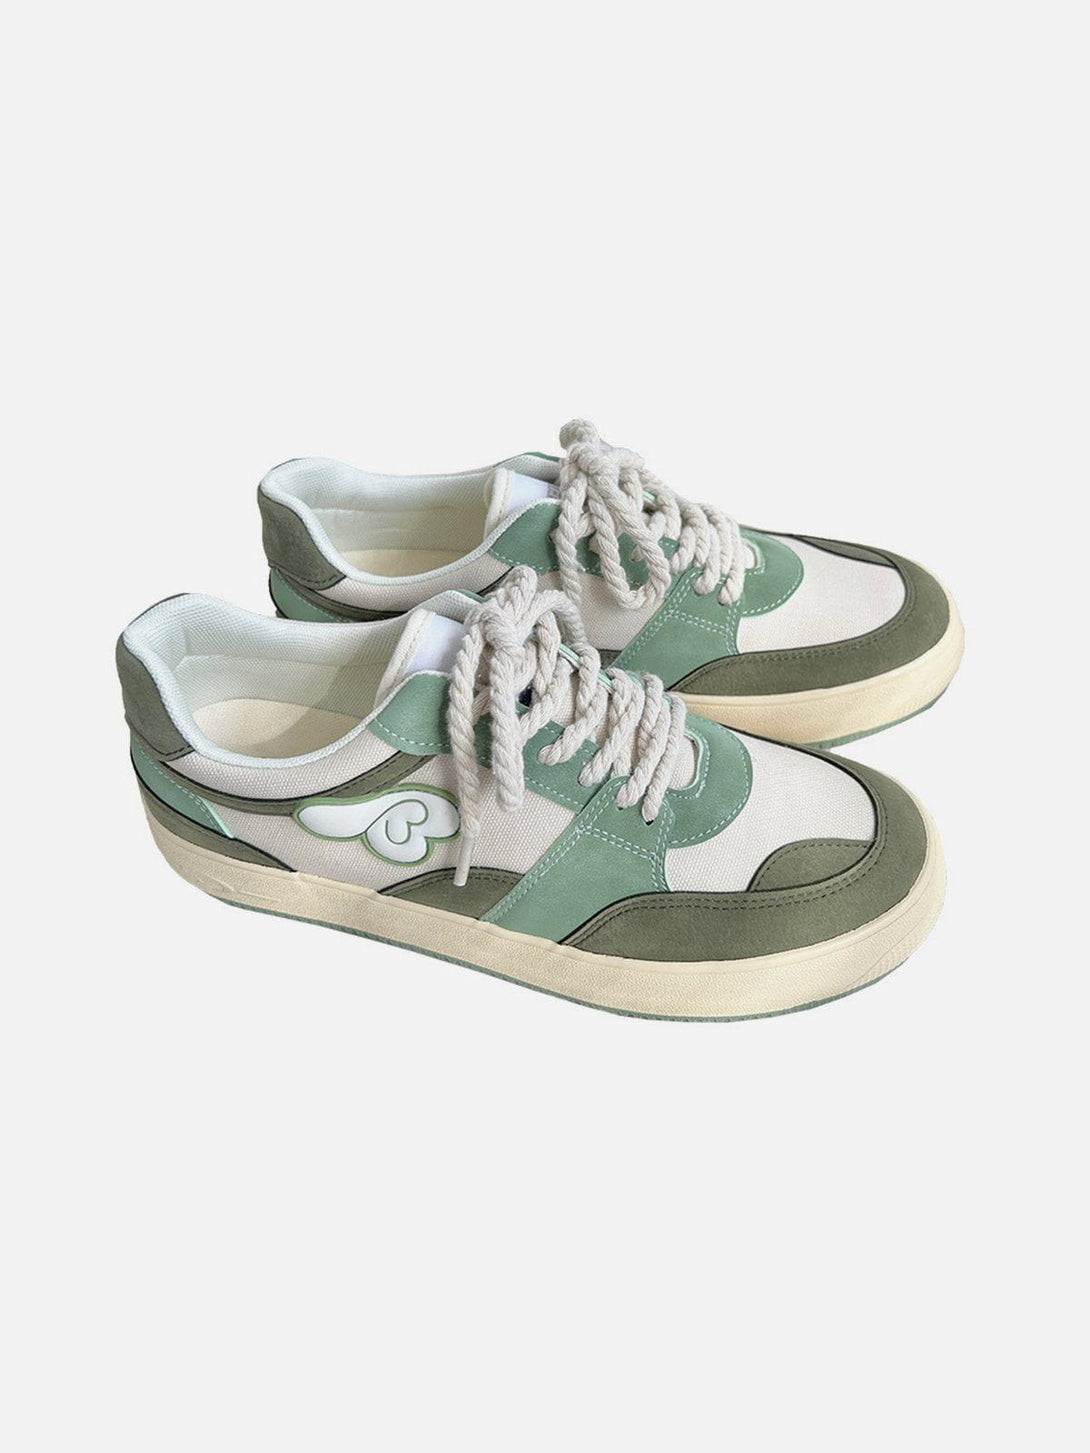 Levefly - Colorblock Canvas Wings Graphic Casual Shoes - Streetwear Fashion - levefly.com